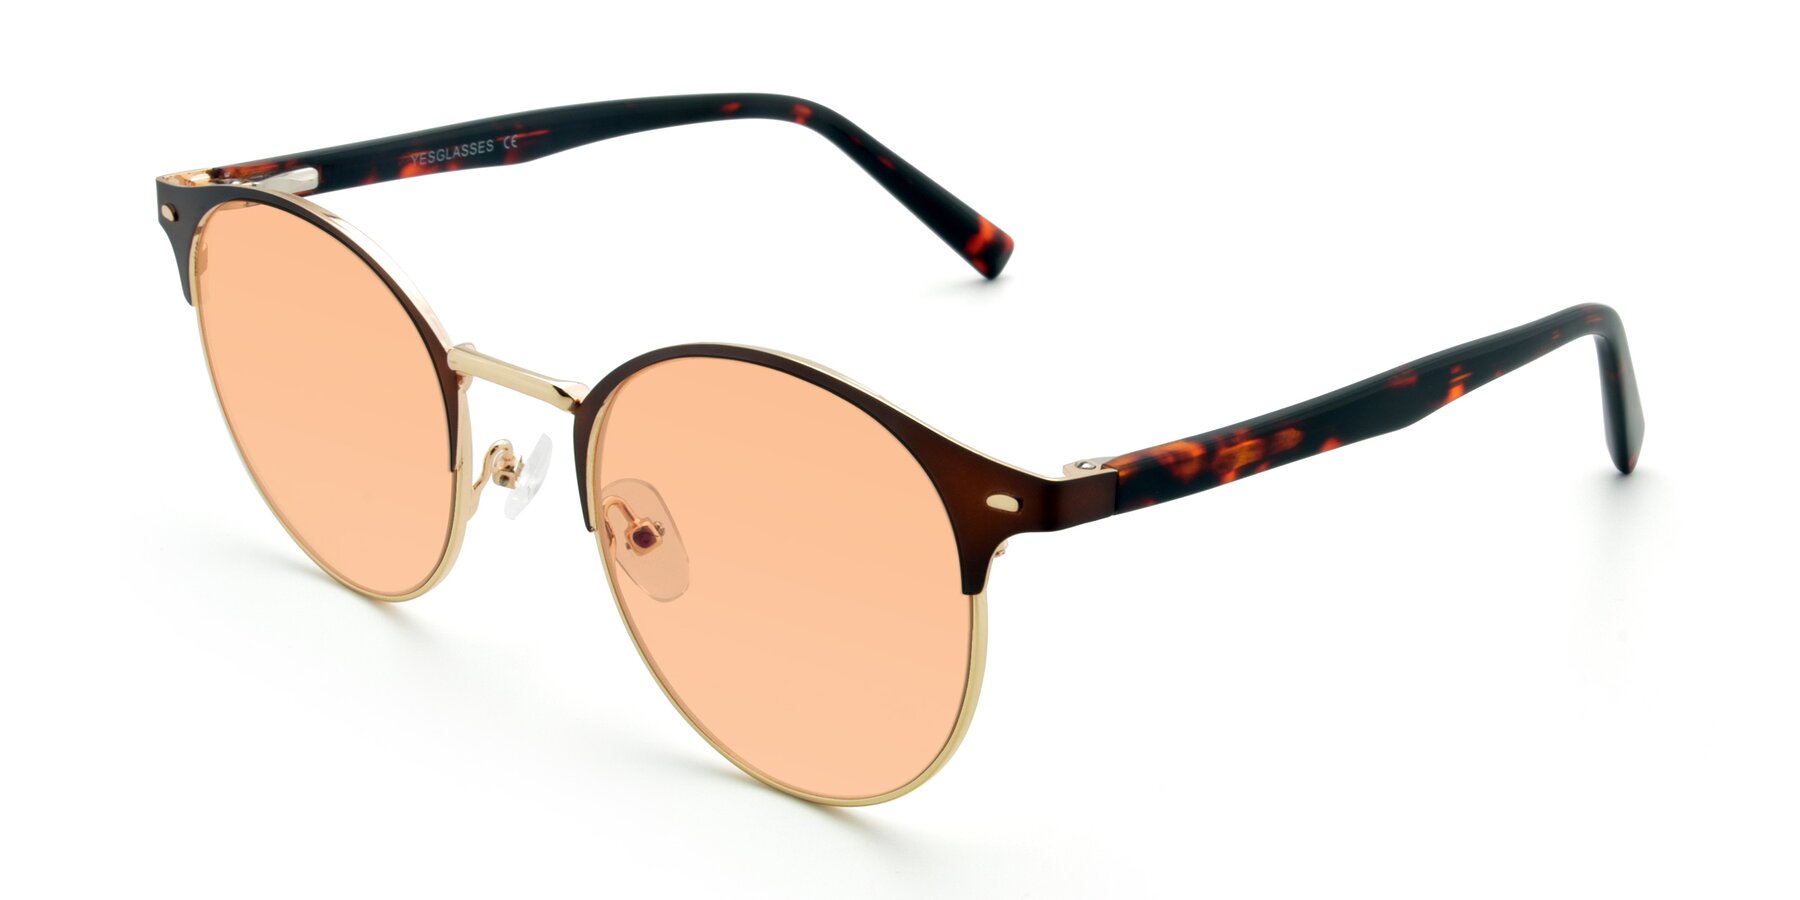 Angle of 9099 in Brown-Gold with Light Orange Tinted Lenses